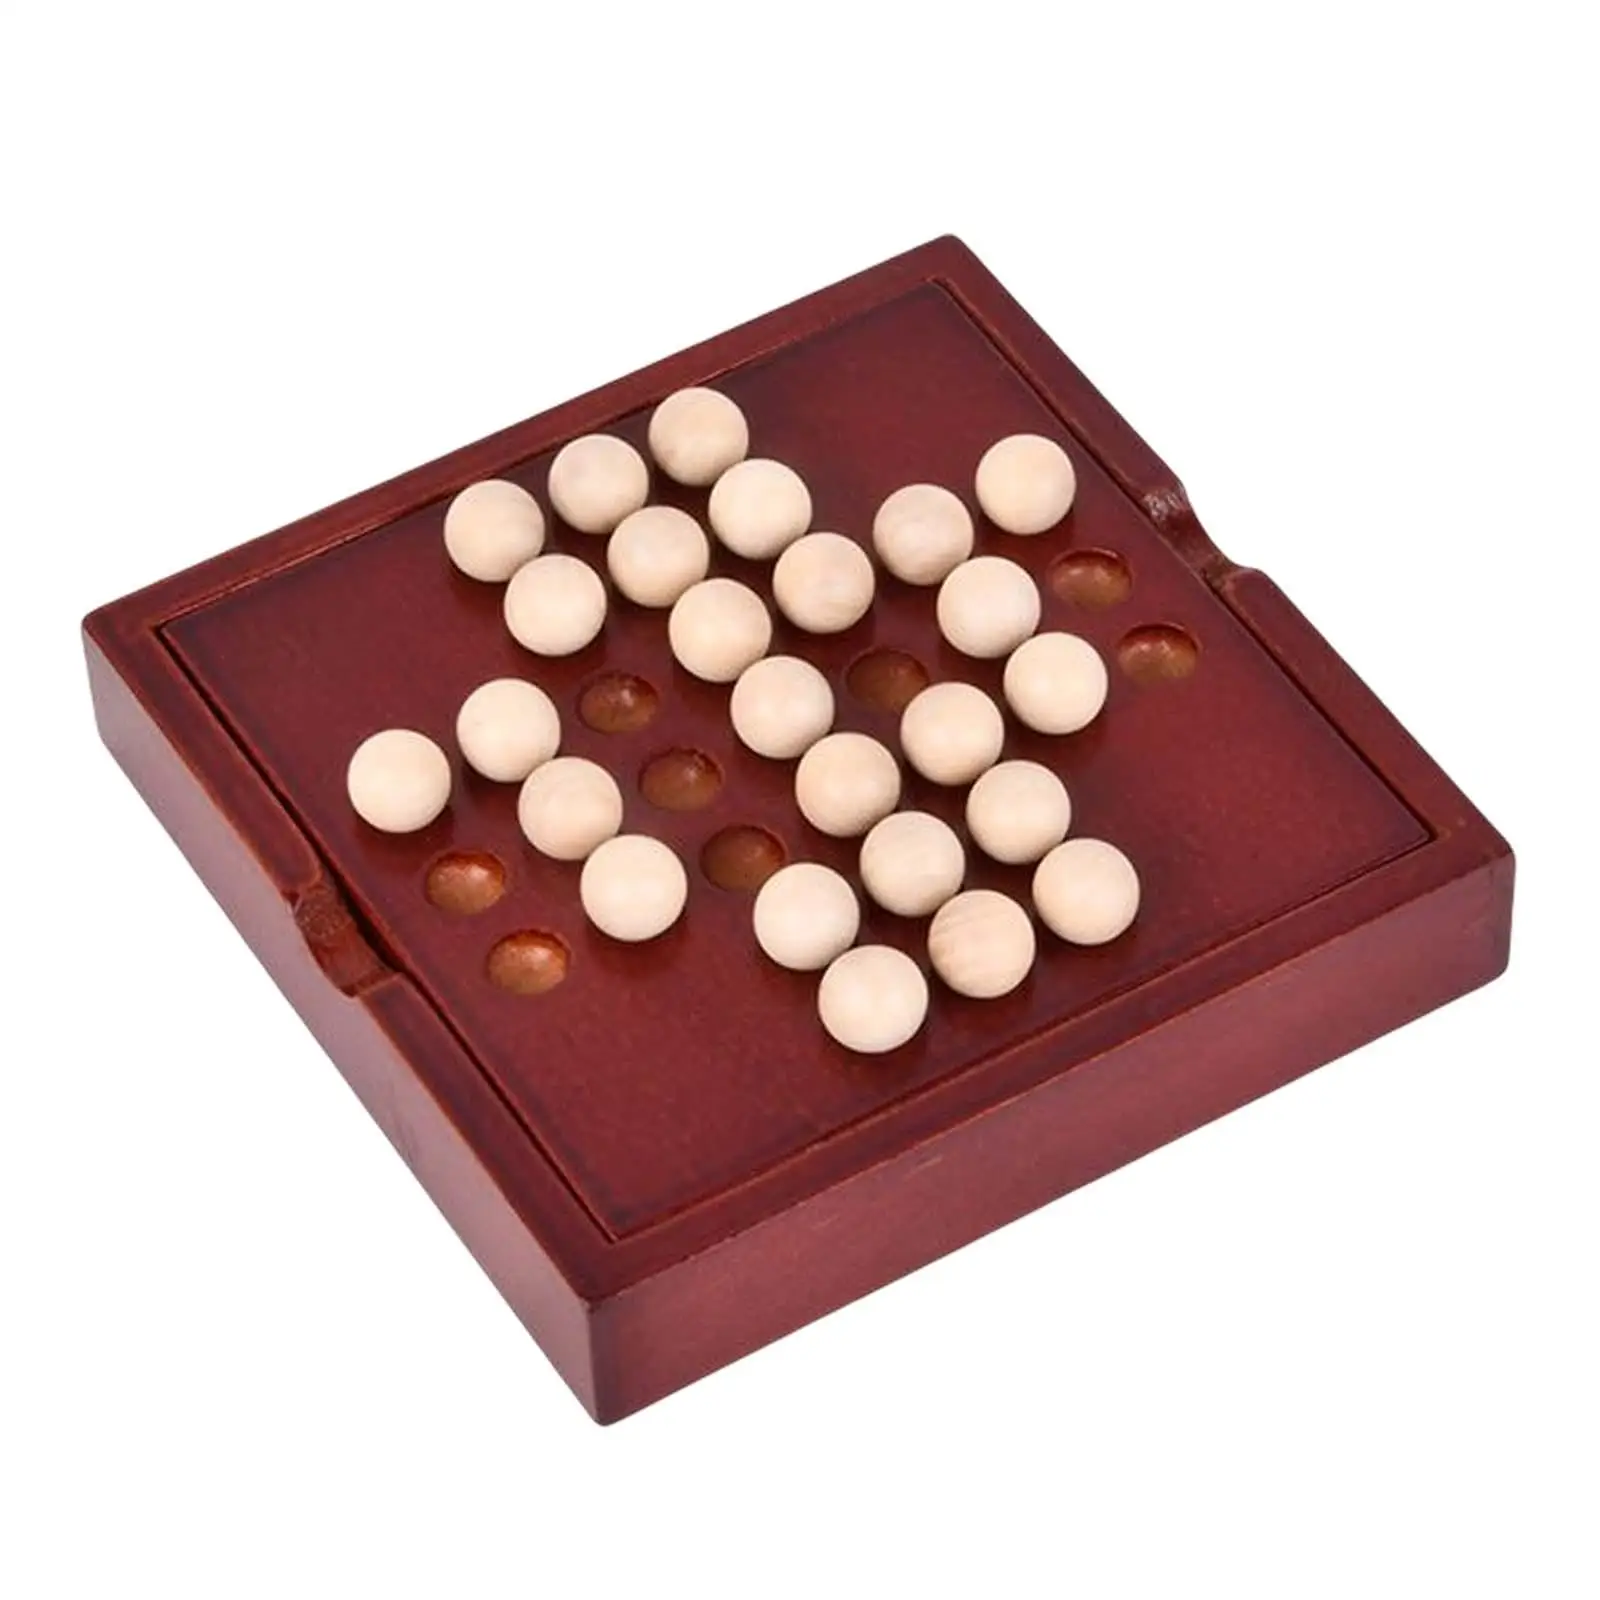 Classical Educational Toy Wooden Peg Solitaire Chess Board Game for Gifts